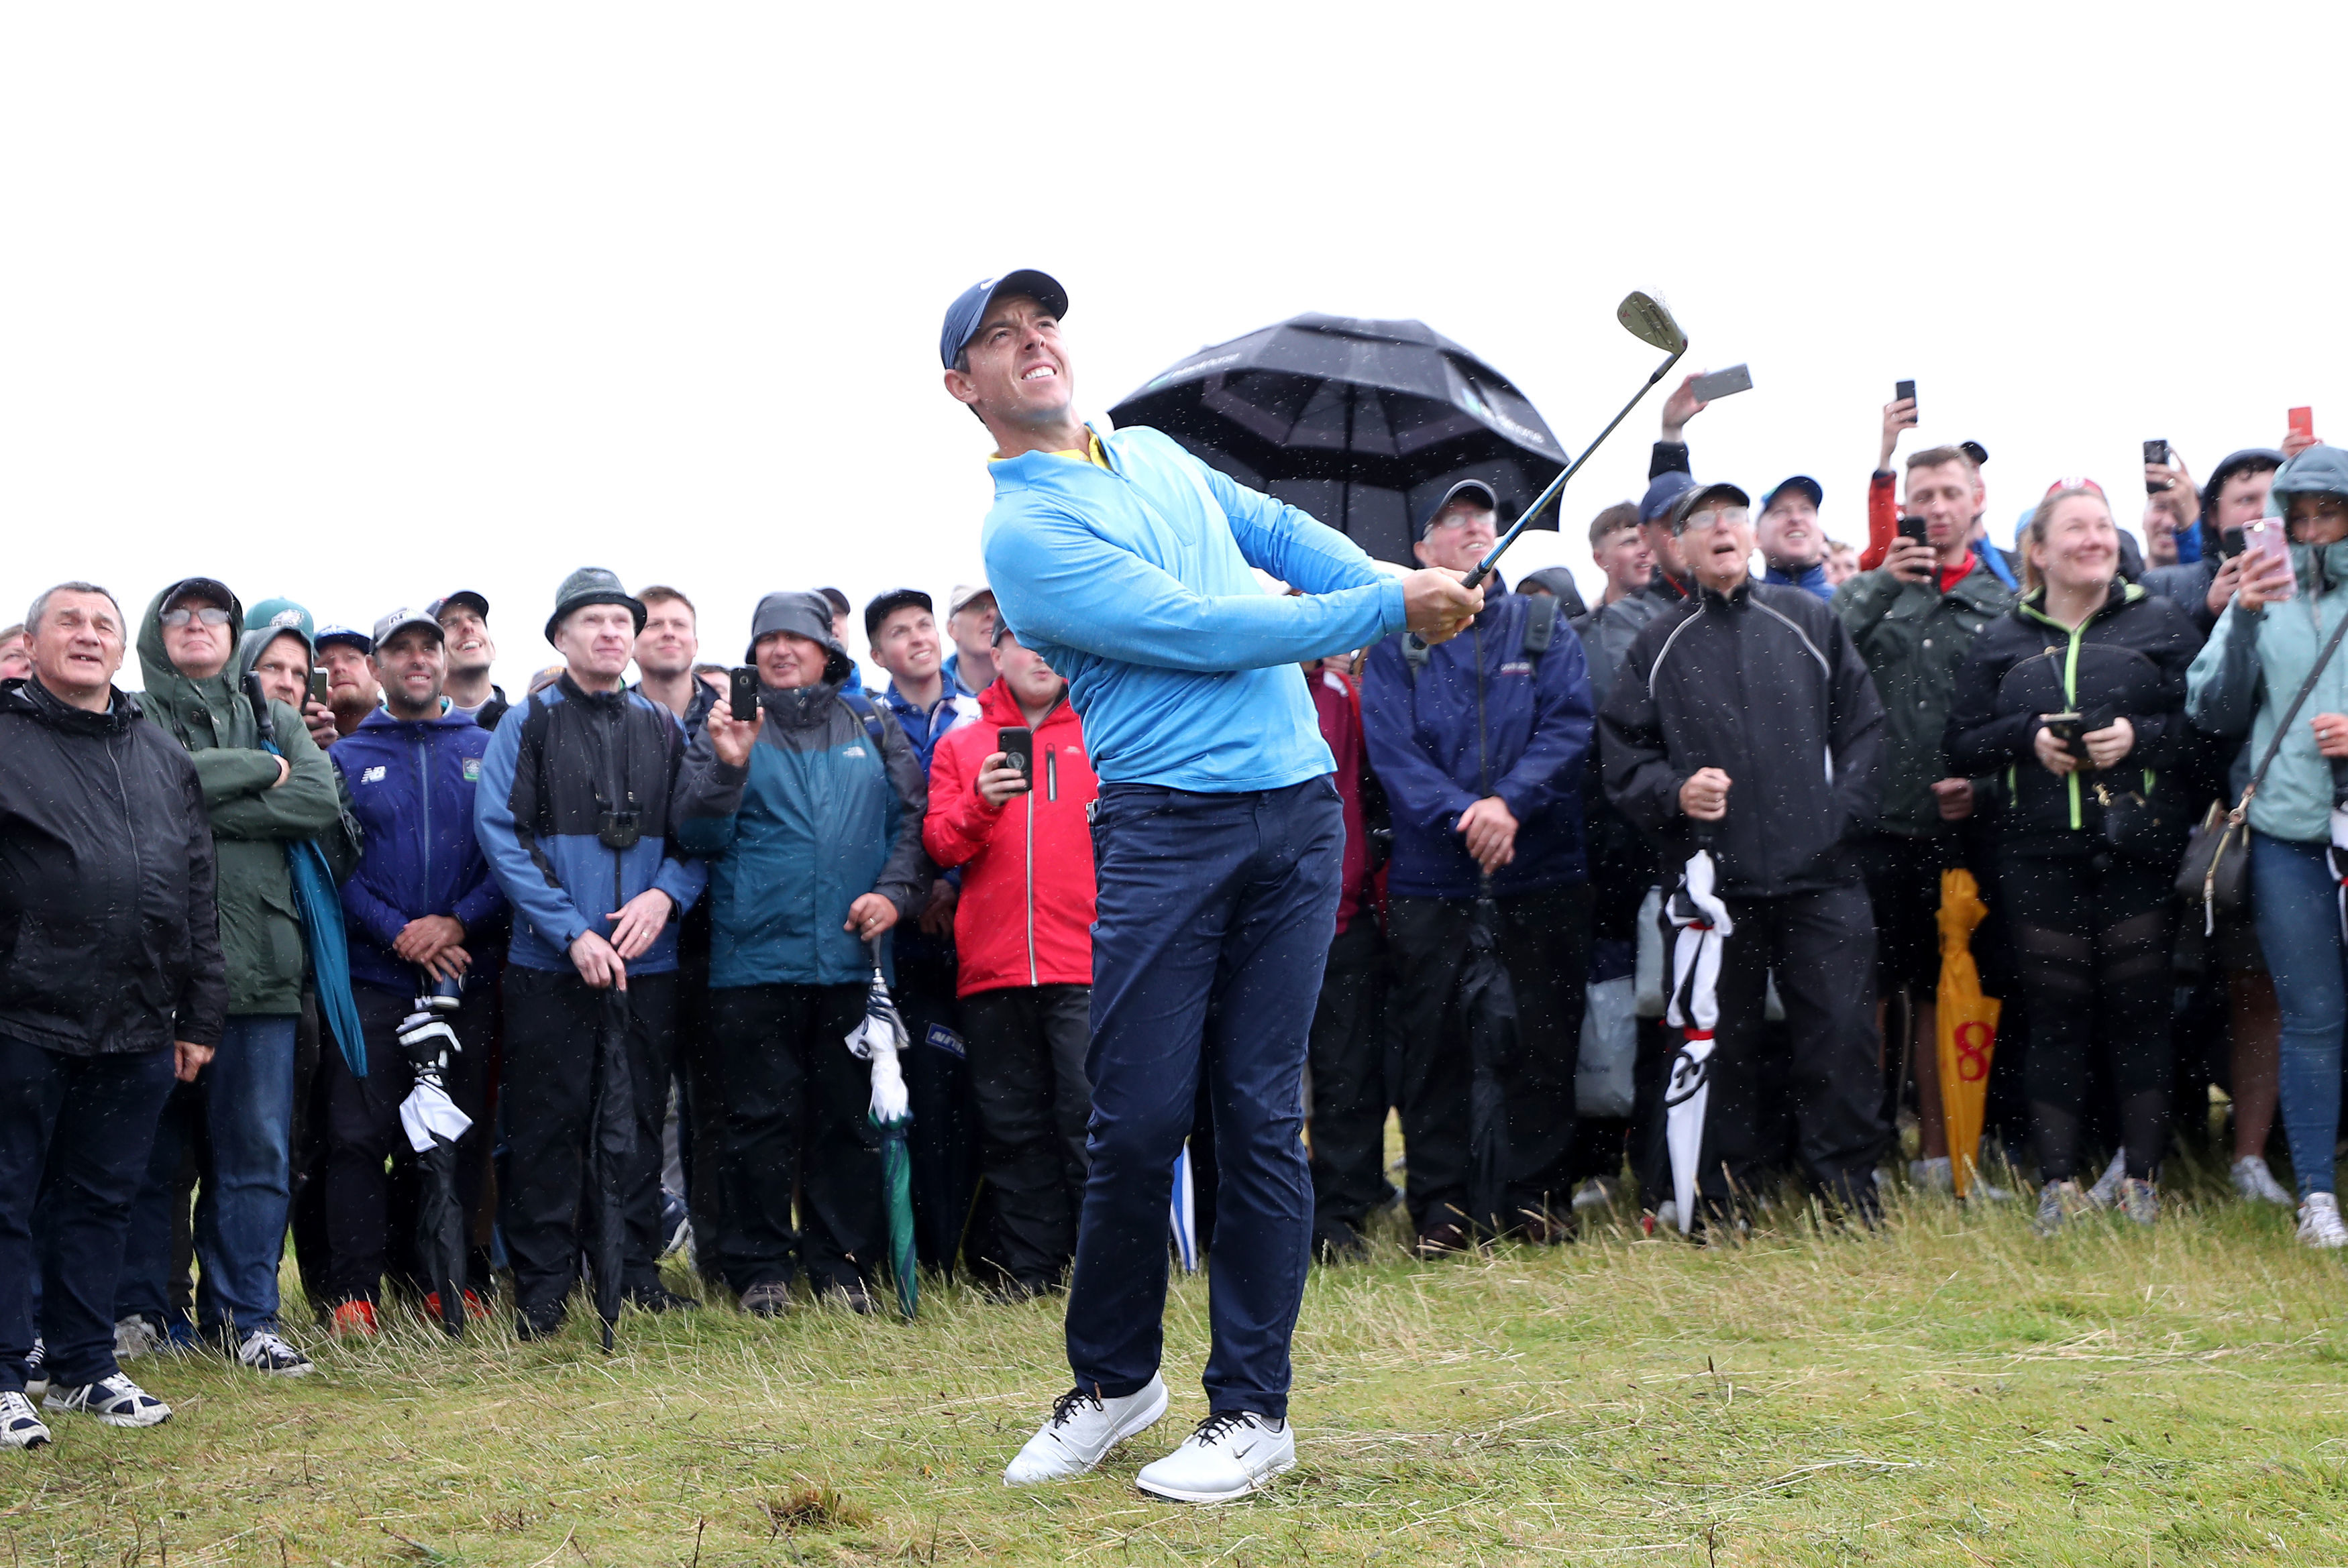 Rory McIlroy was the centre of attention at least for a while in practice at Portrush yesterday.